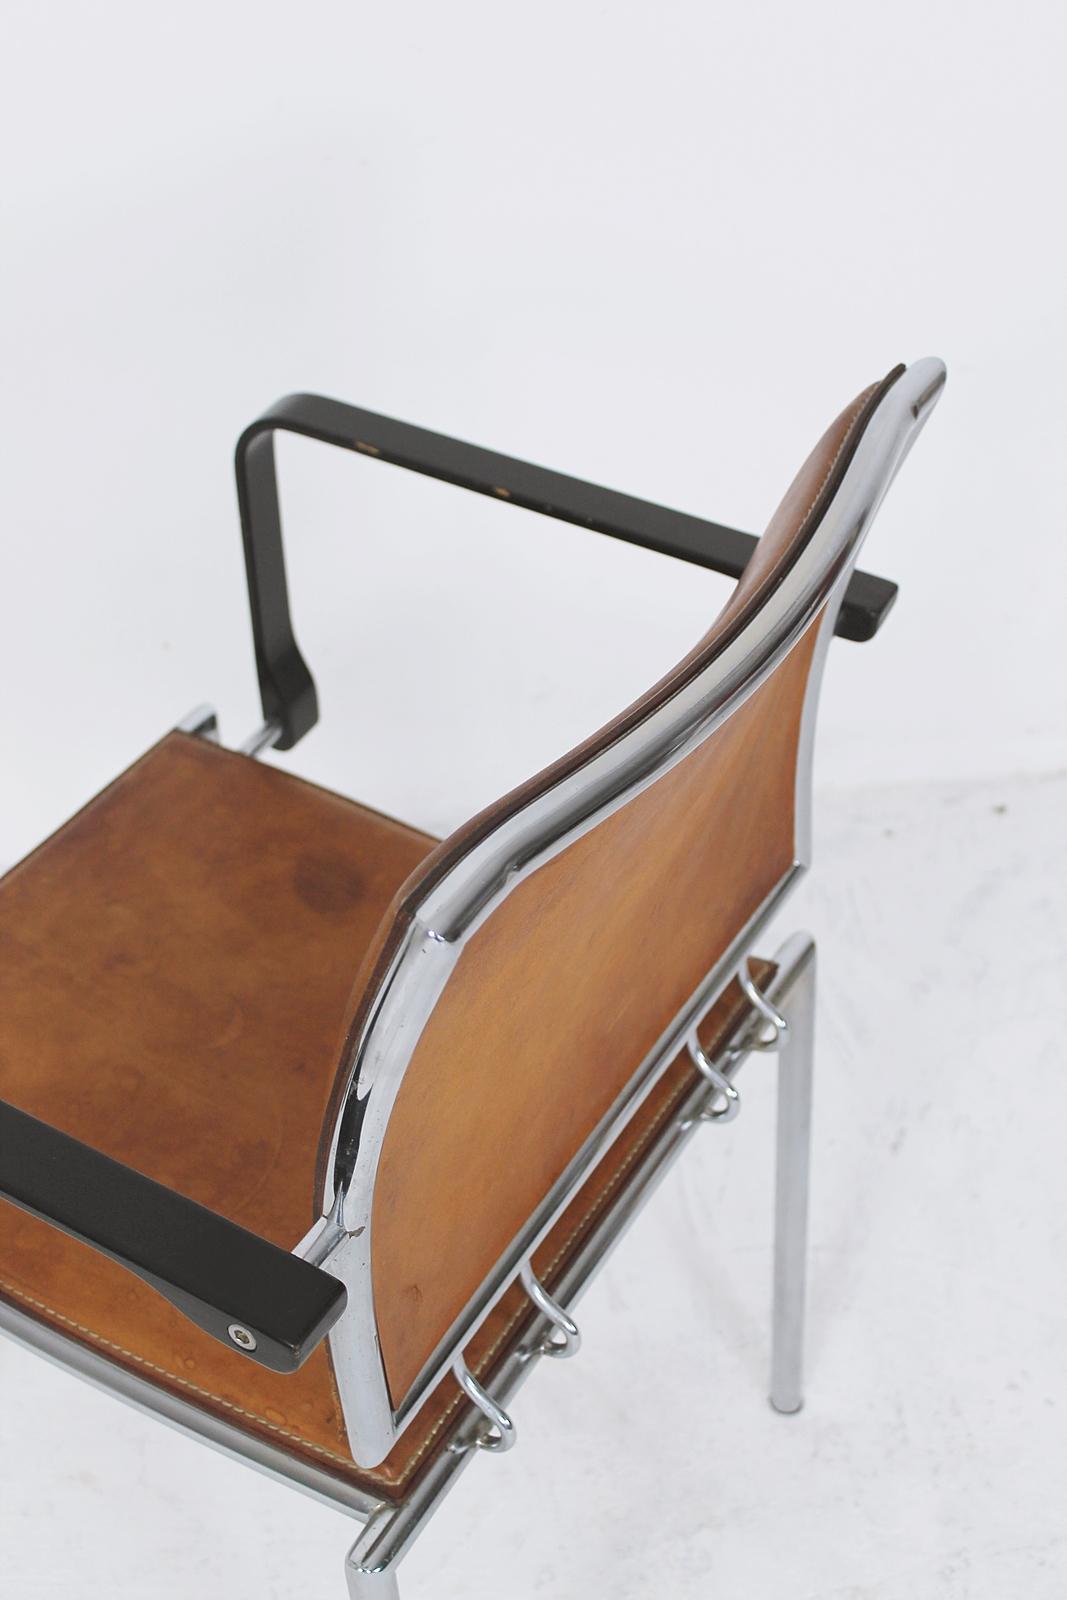 Swiss Armchair Quadro Steel by Bruno Rey & Charles Polin for Dietiker, 1990s For Sale 6